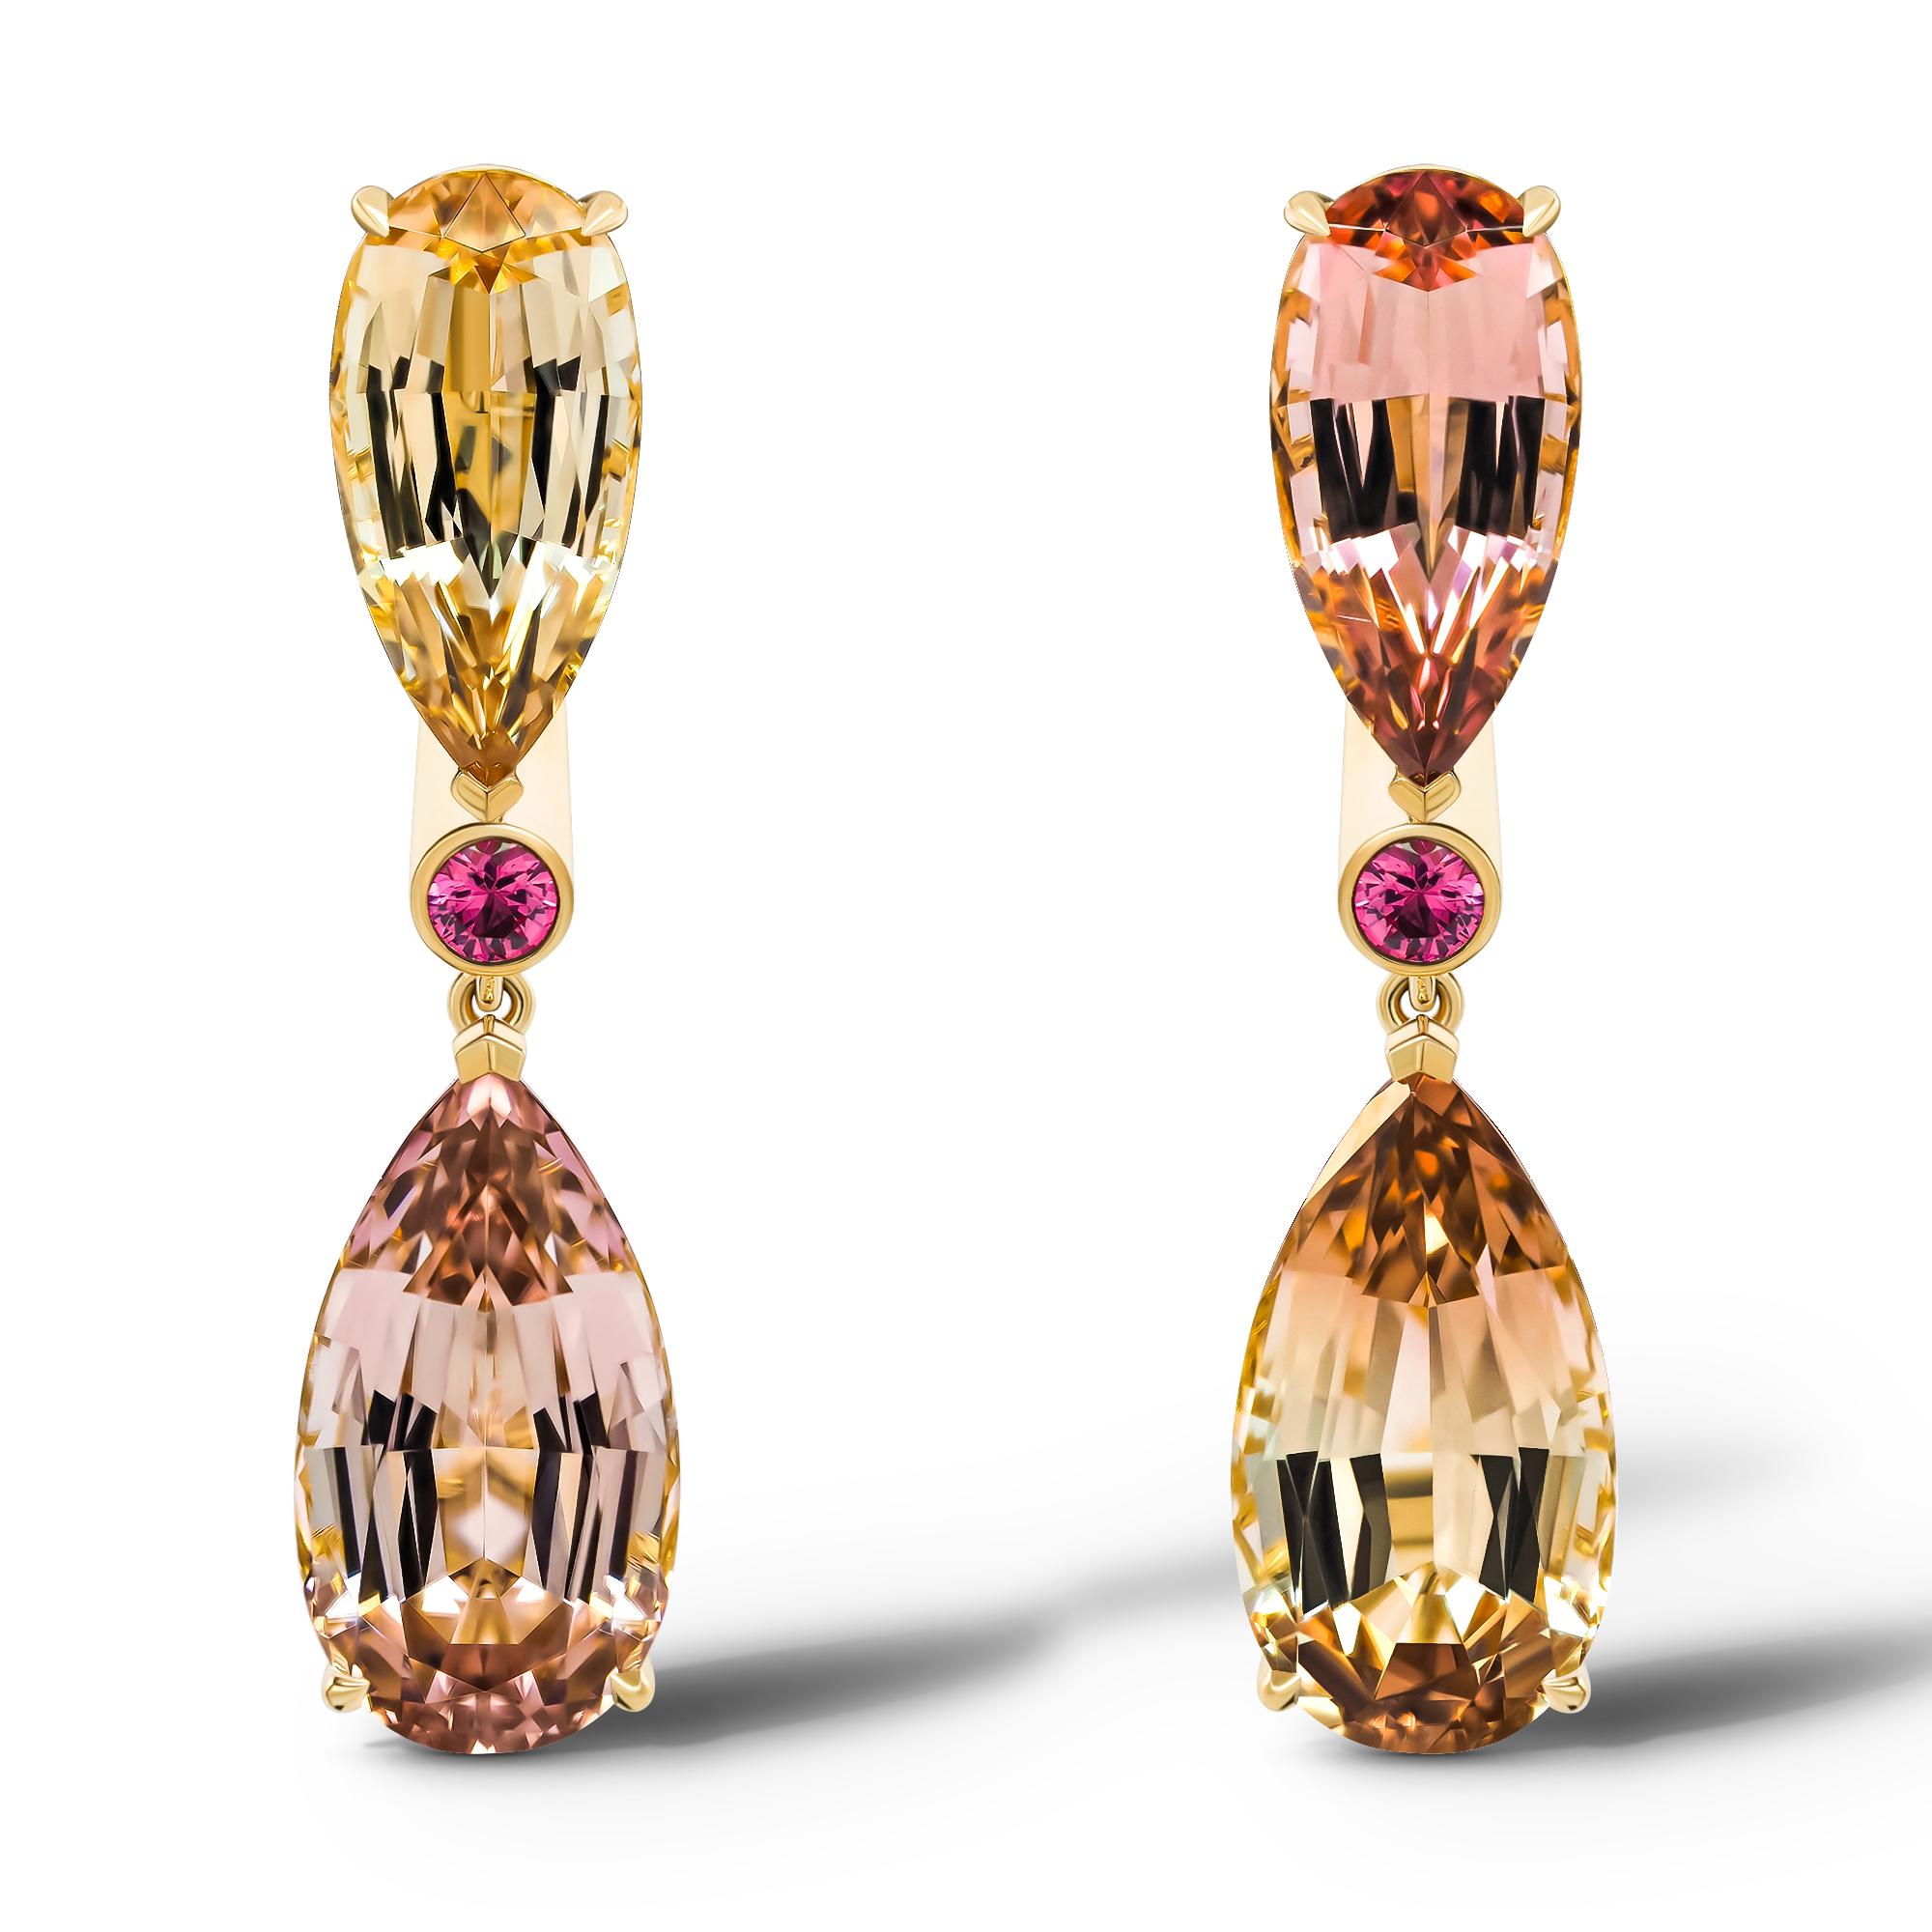 • 18k Yellow Gold.
• Tourmalines in drop cut – 4 pc, total carat weight – 13.24. 
• Spinels in round cut – 2 pc, total carat weight – 0.25.
• Product weight – 4.30 grams.